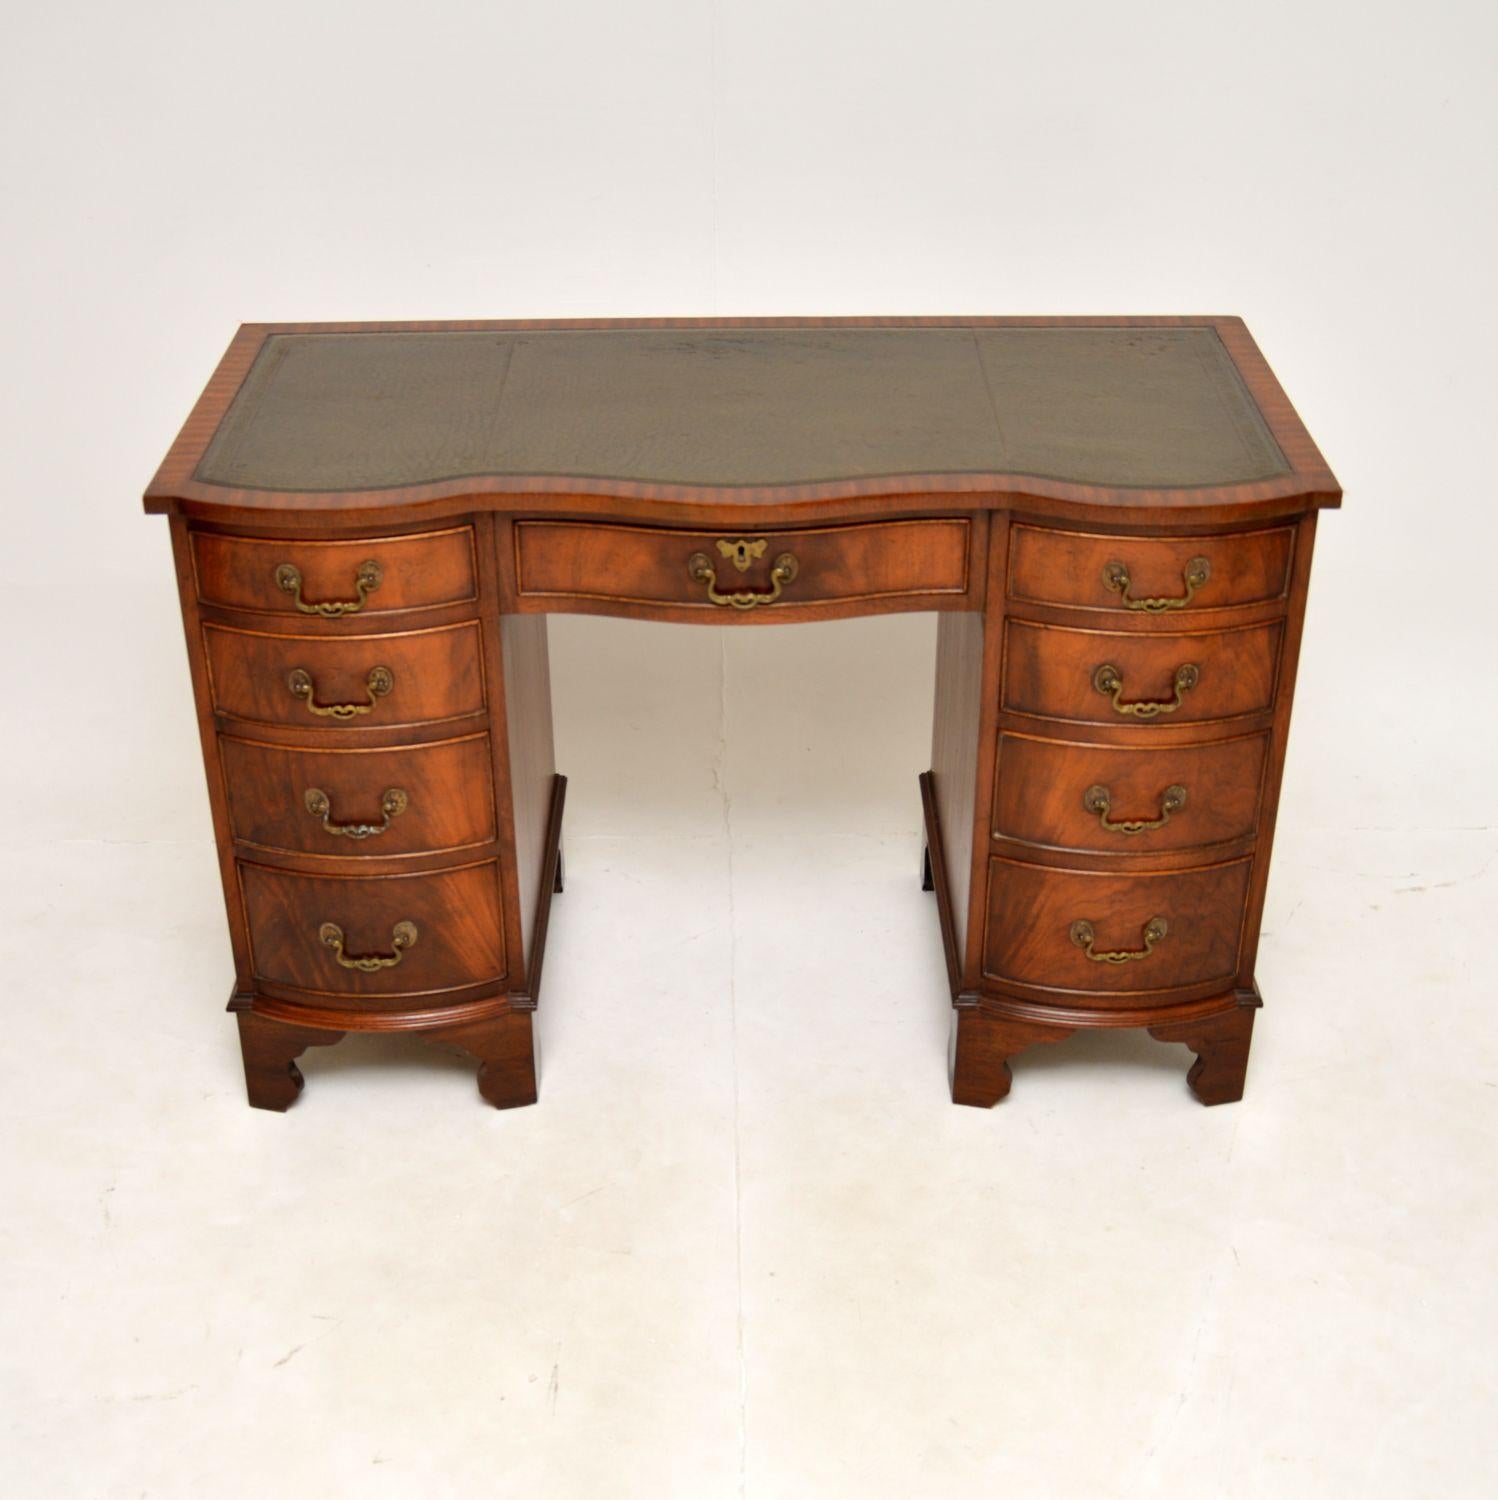 A smart and very well made antique leather top pedestal desk. This was made in England, it dates from around the 1950’s.

It is of superb quality and is a very useful size. This has a serpentine shaped front, it sits on bracket feet and has a lovely